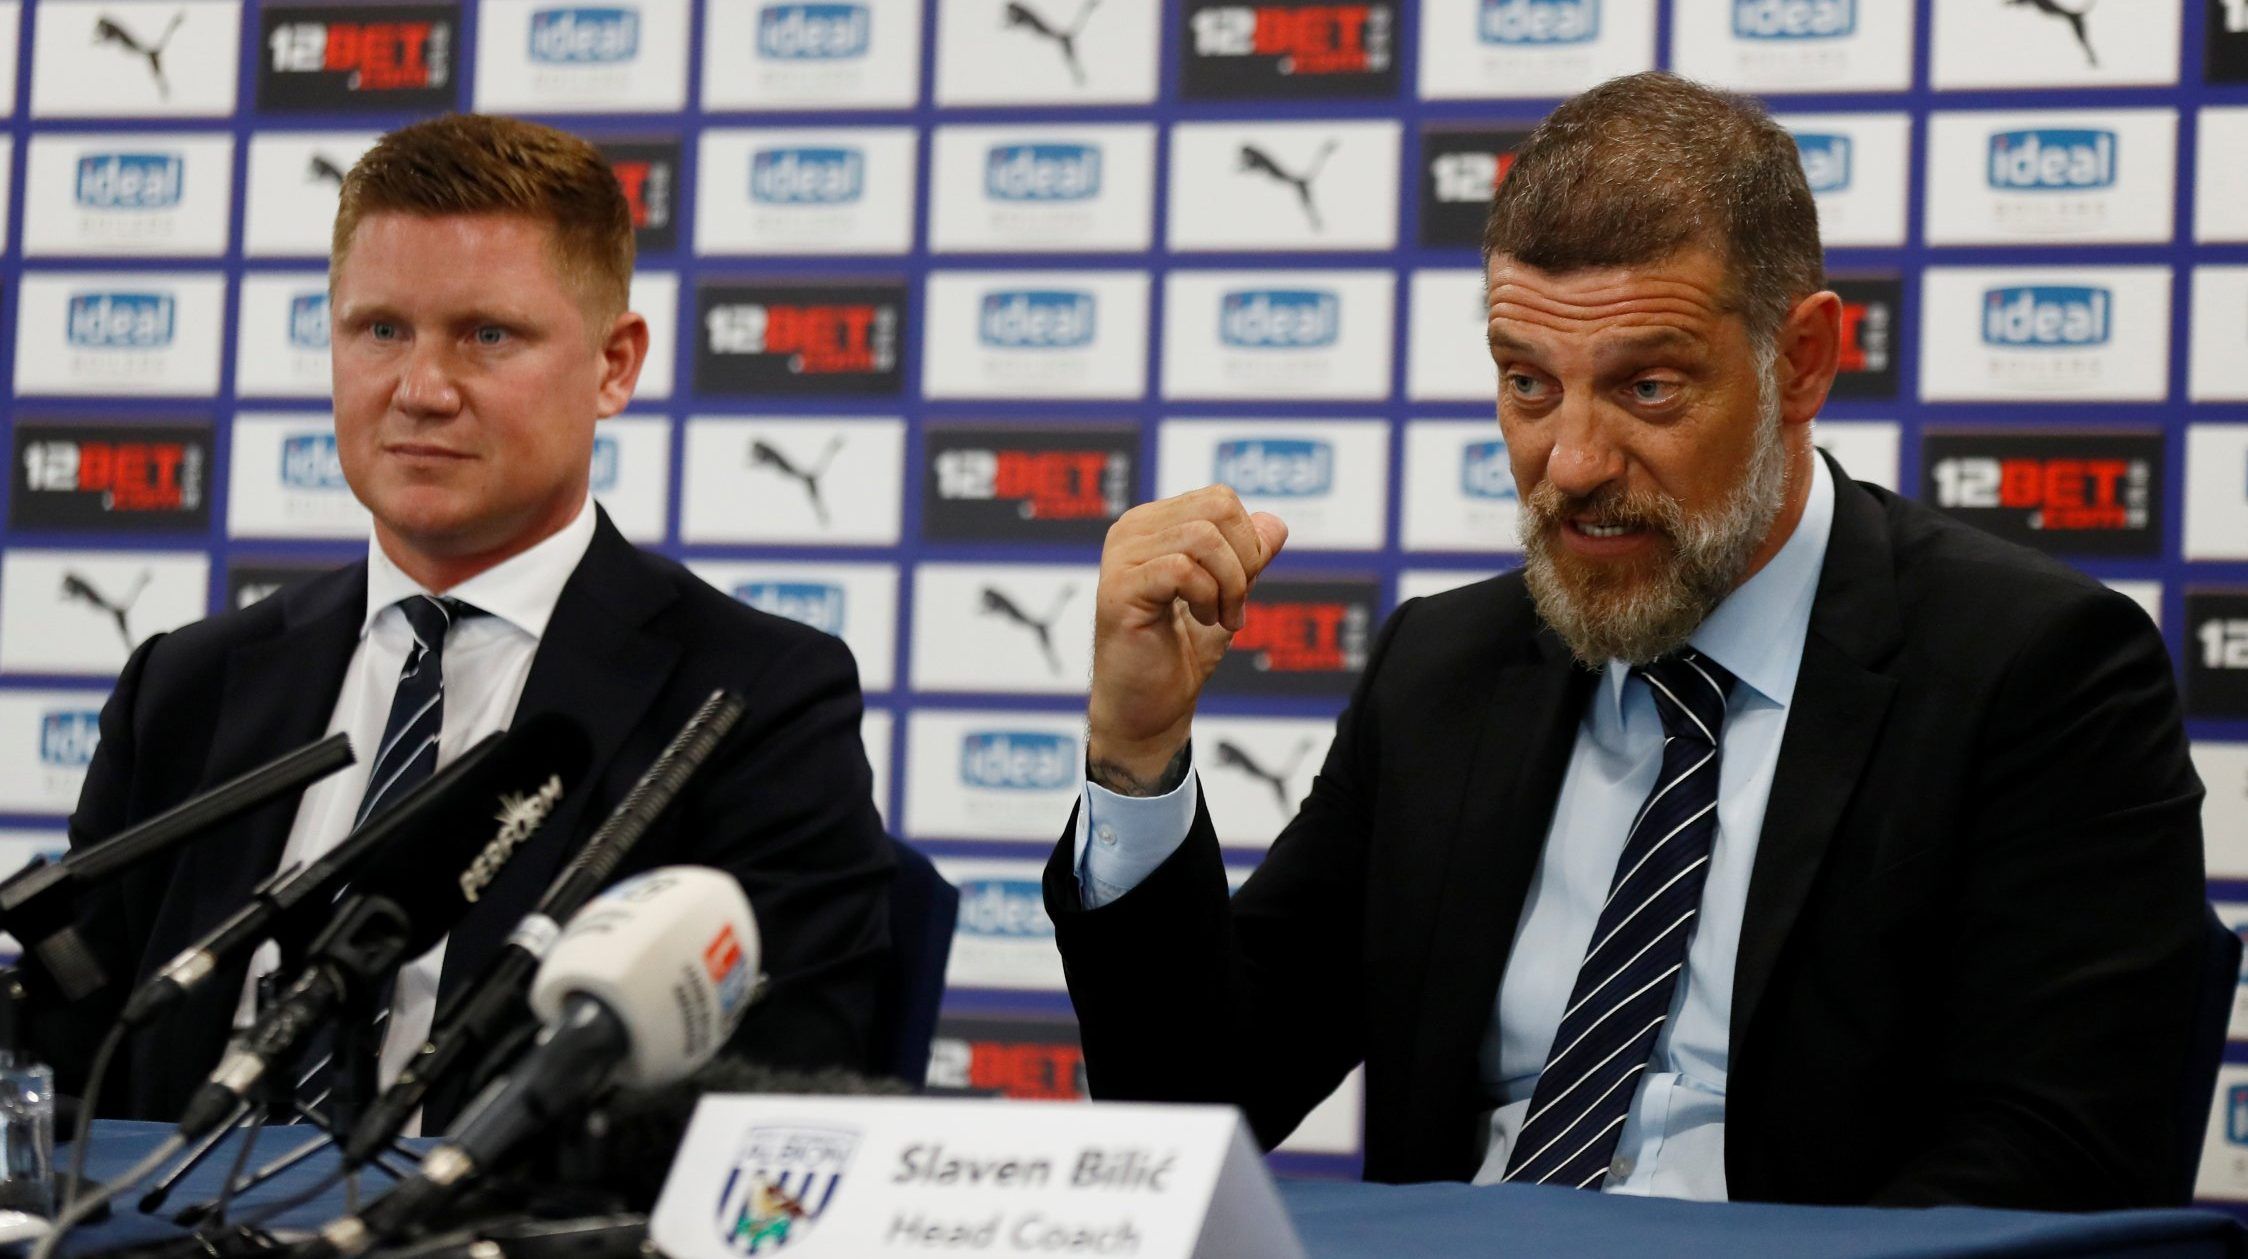 west brom appoint slaven bilic press conference sporting director luke dowling hawthorns